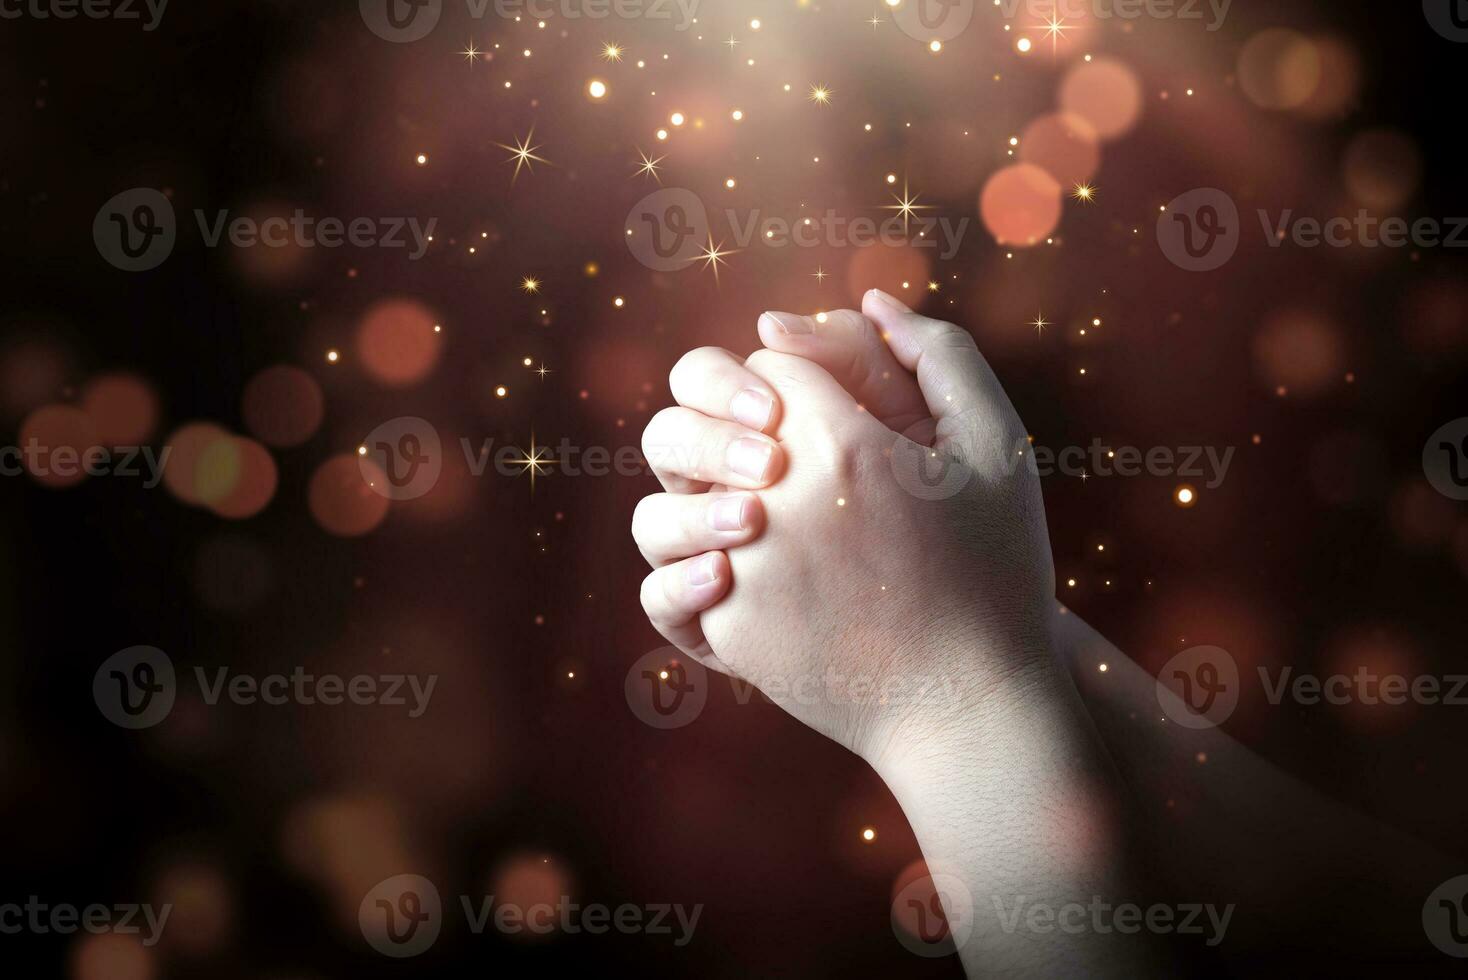 Praying hands of men with light shining from above. concept of prayer and faith, spirituality related to religion and belief. photo